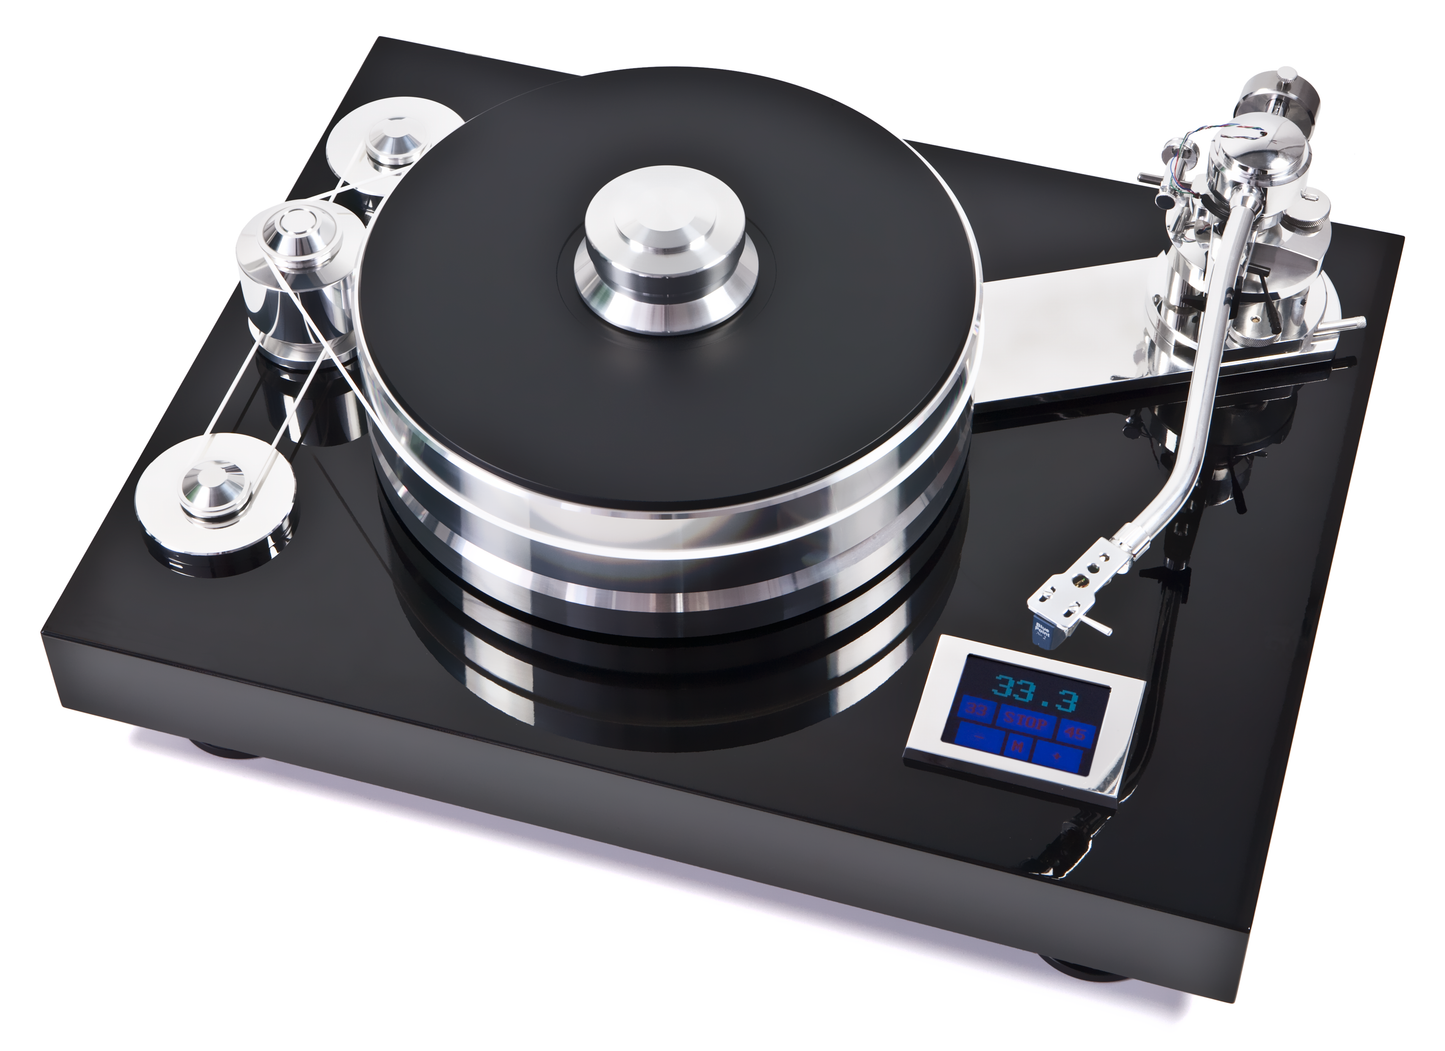 Pro-Ject Signature Turntable